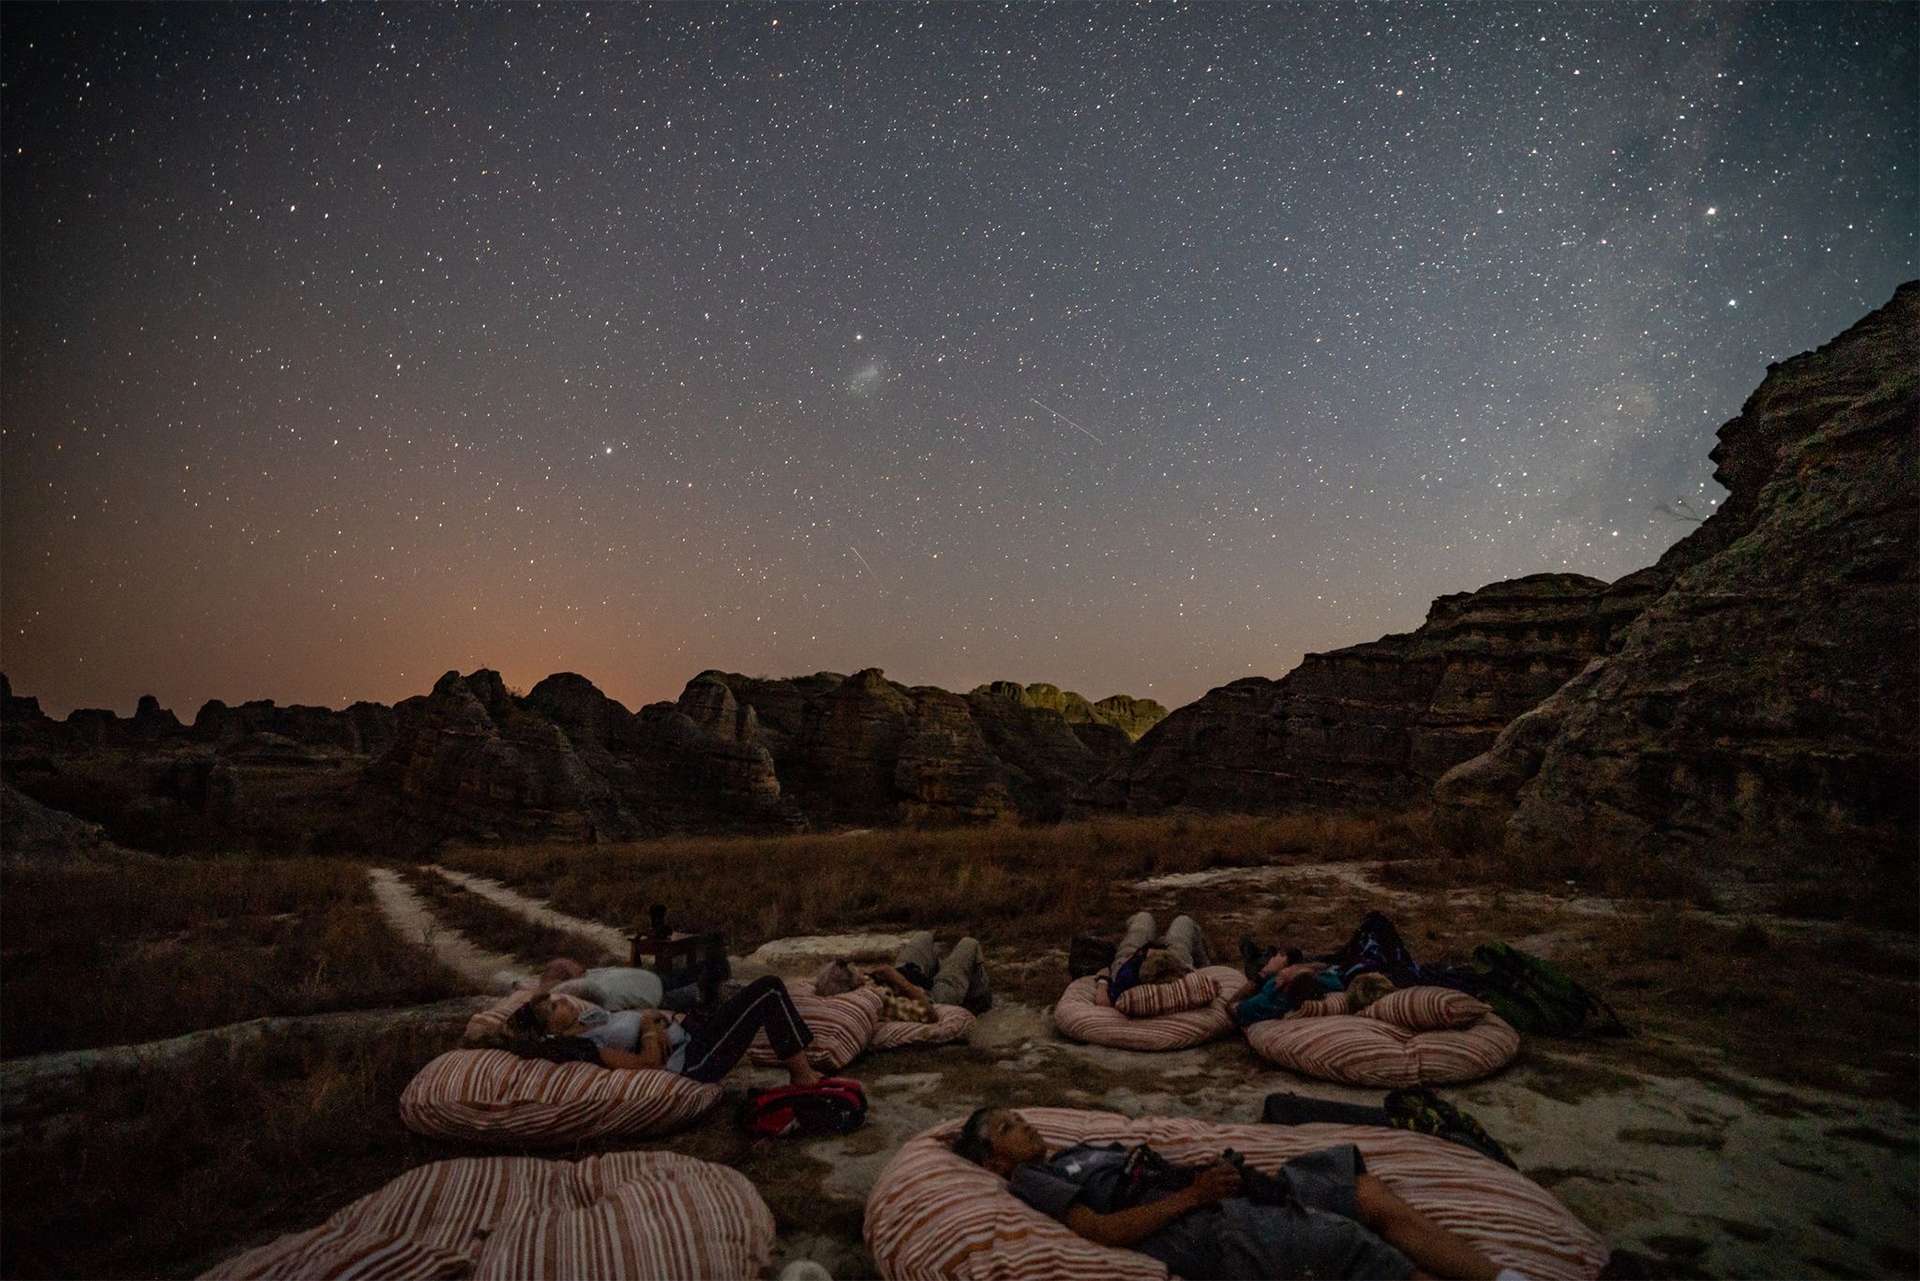 A magical experience shared by Nat Hab travelers stargazing in Madagascar TeamJiX